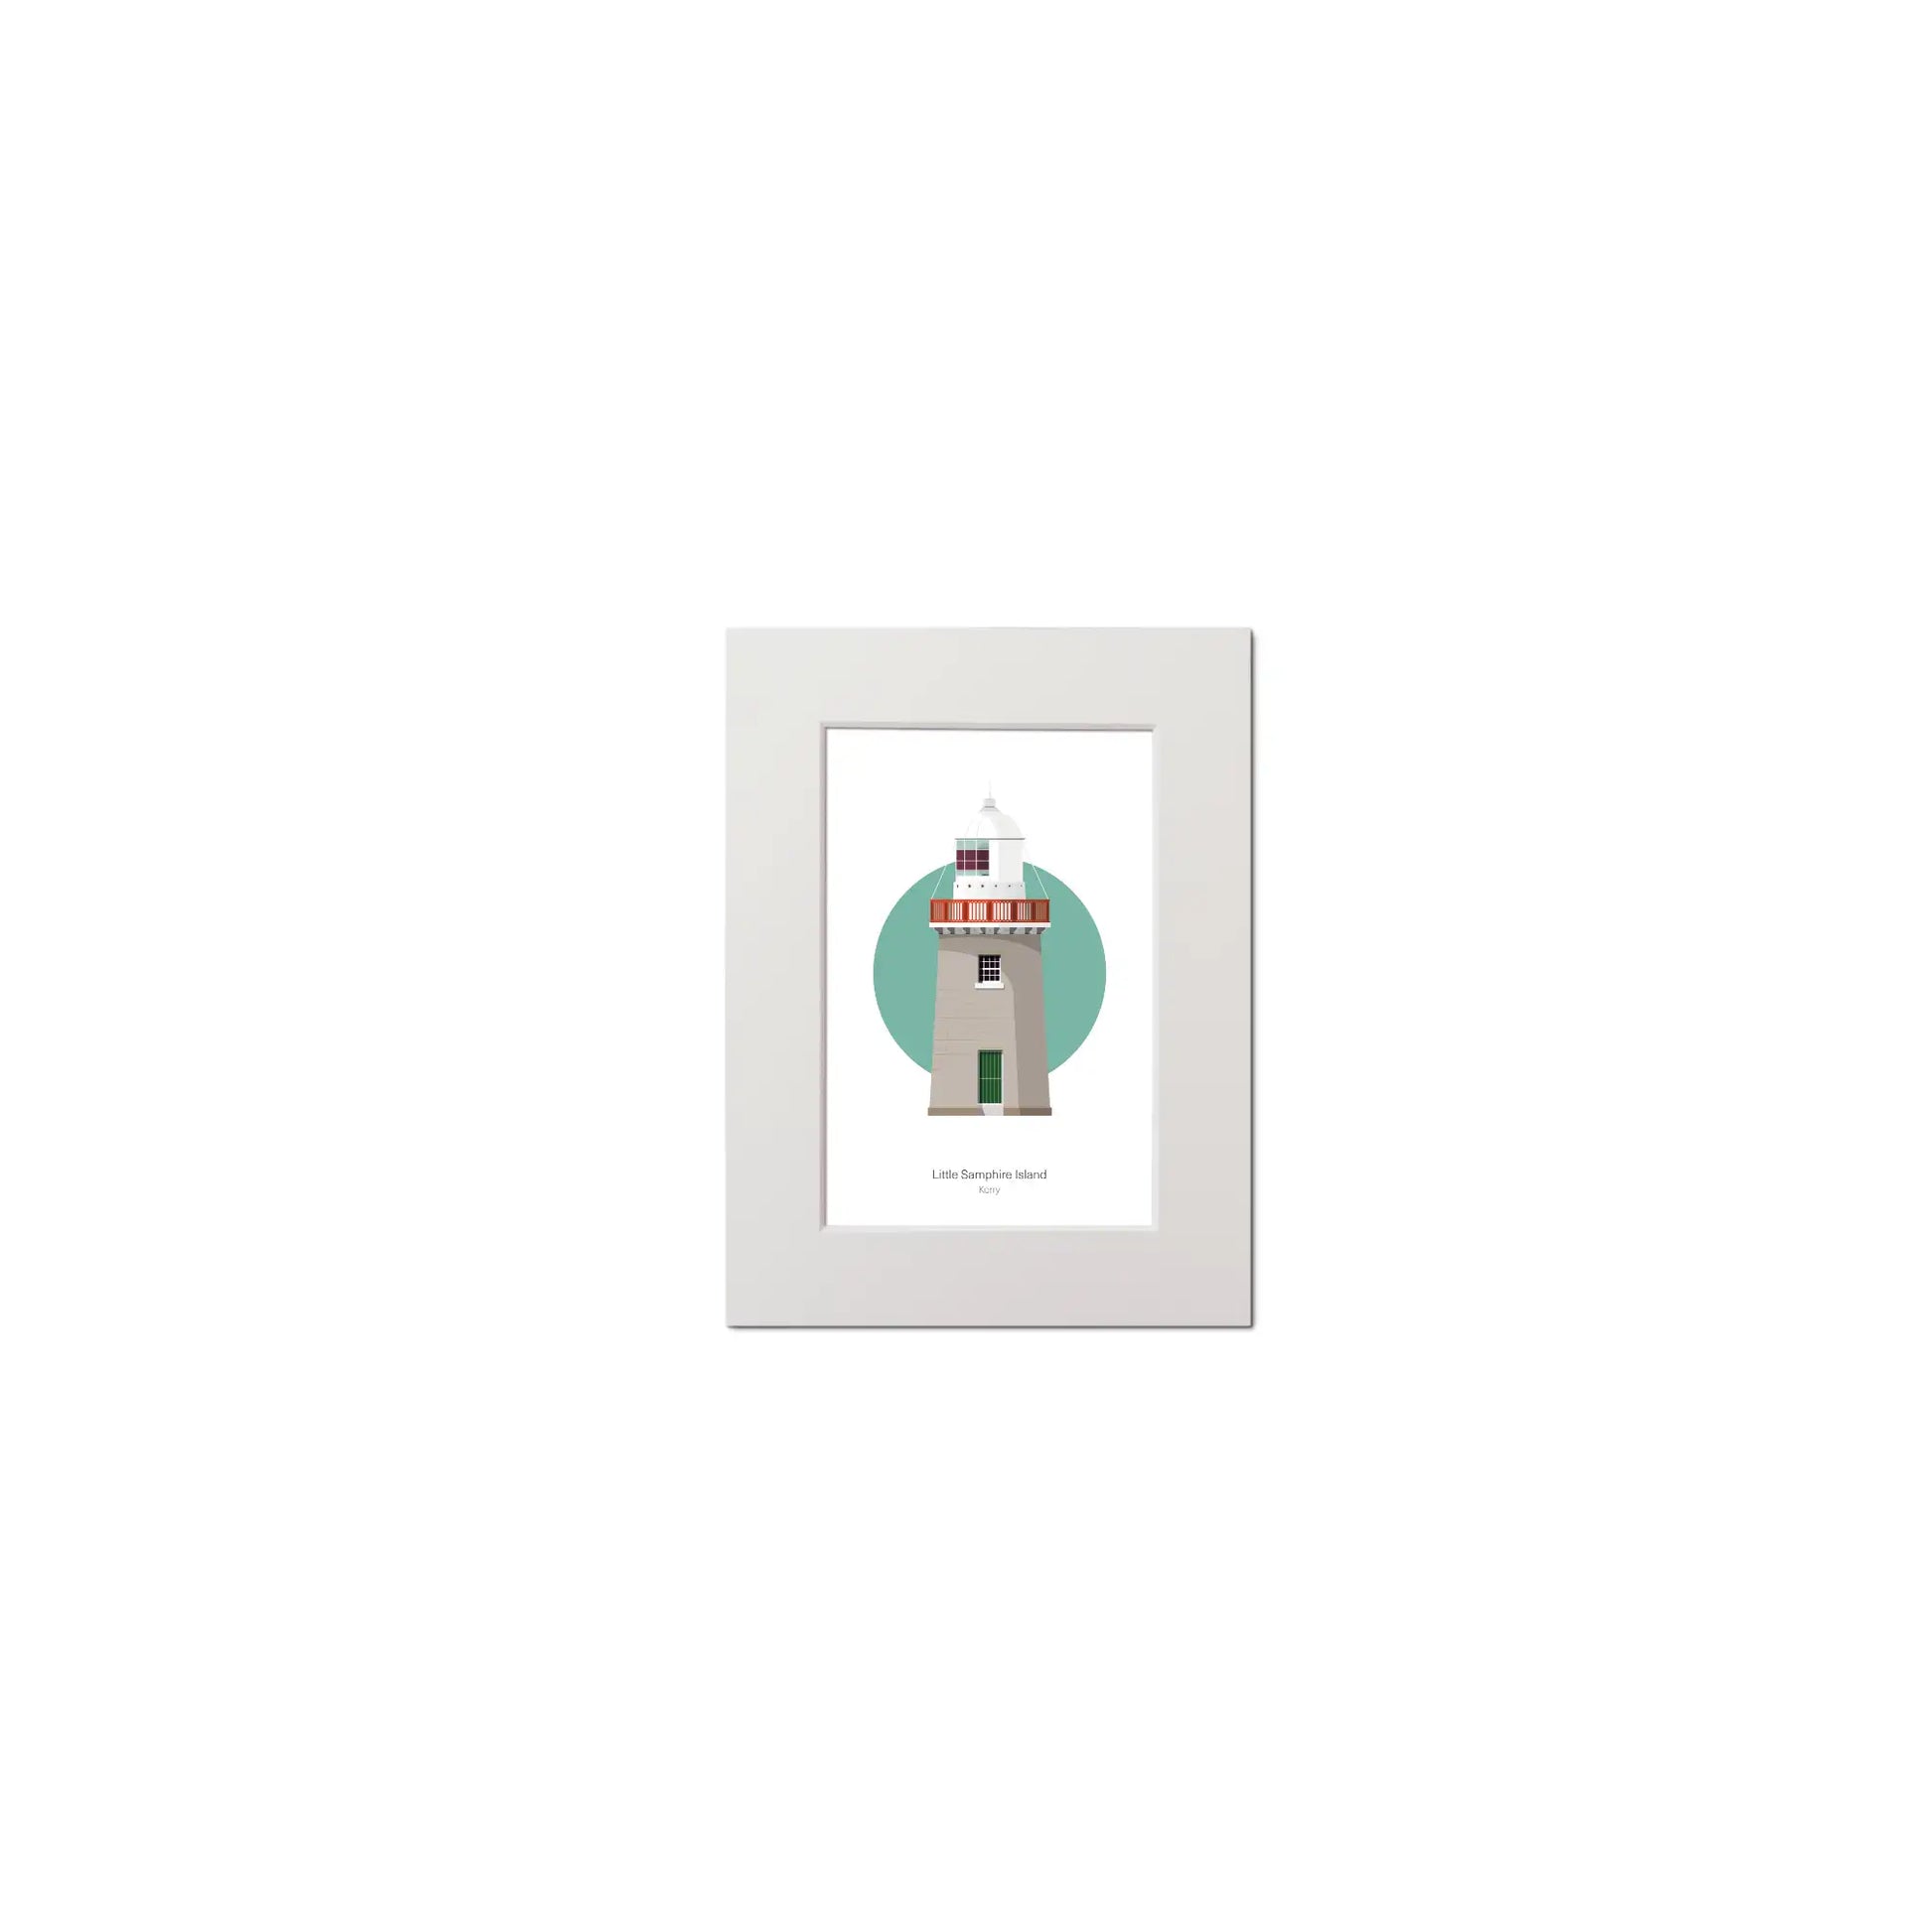 Contemporary graphic illustration of Little Samphire Island lighthouse on a white background inside light blue square, mounted and measuring 15x20cm.